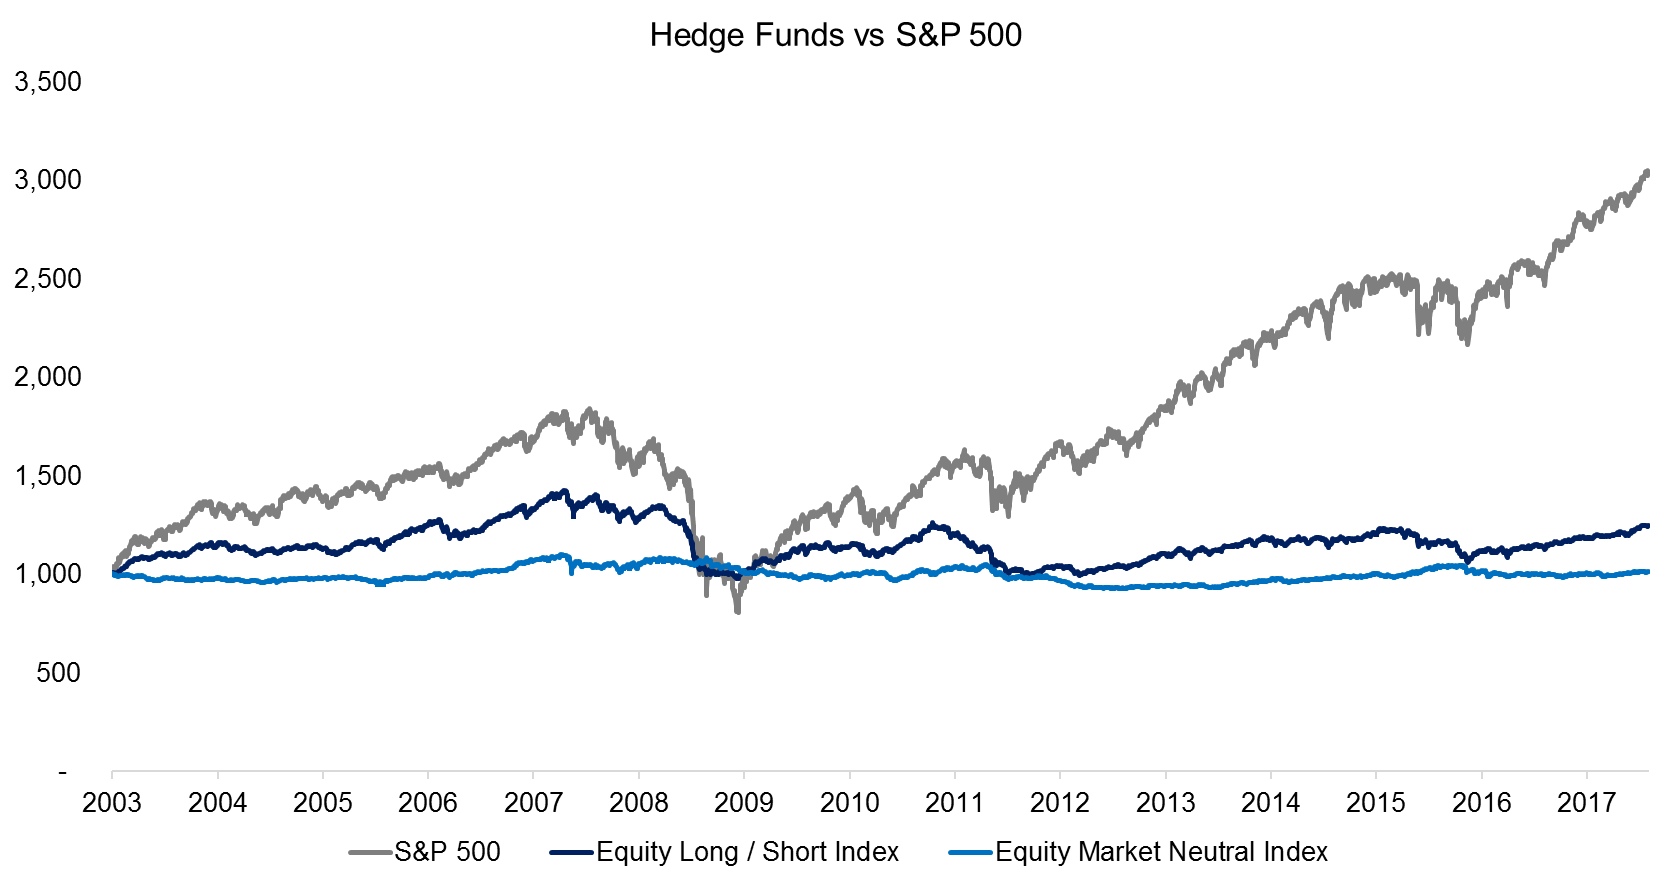 Hedge Funds vs S&P 500